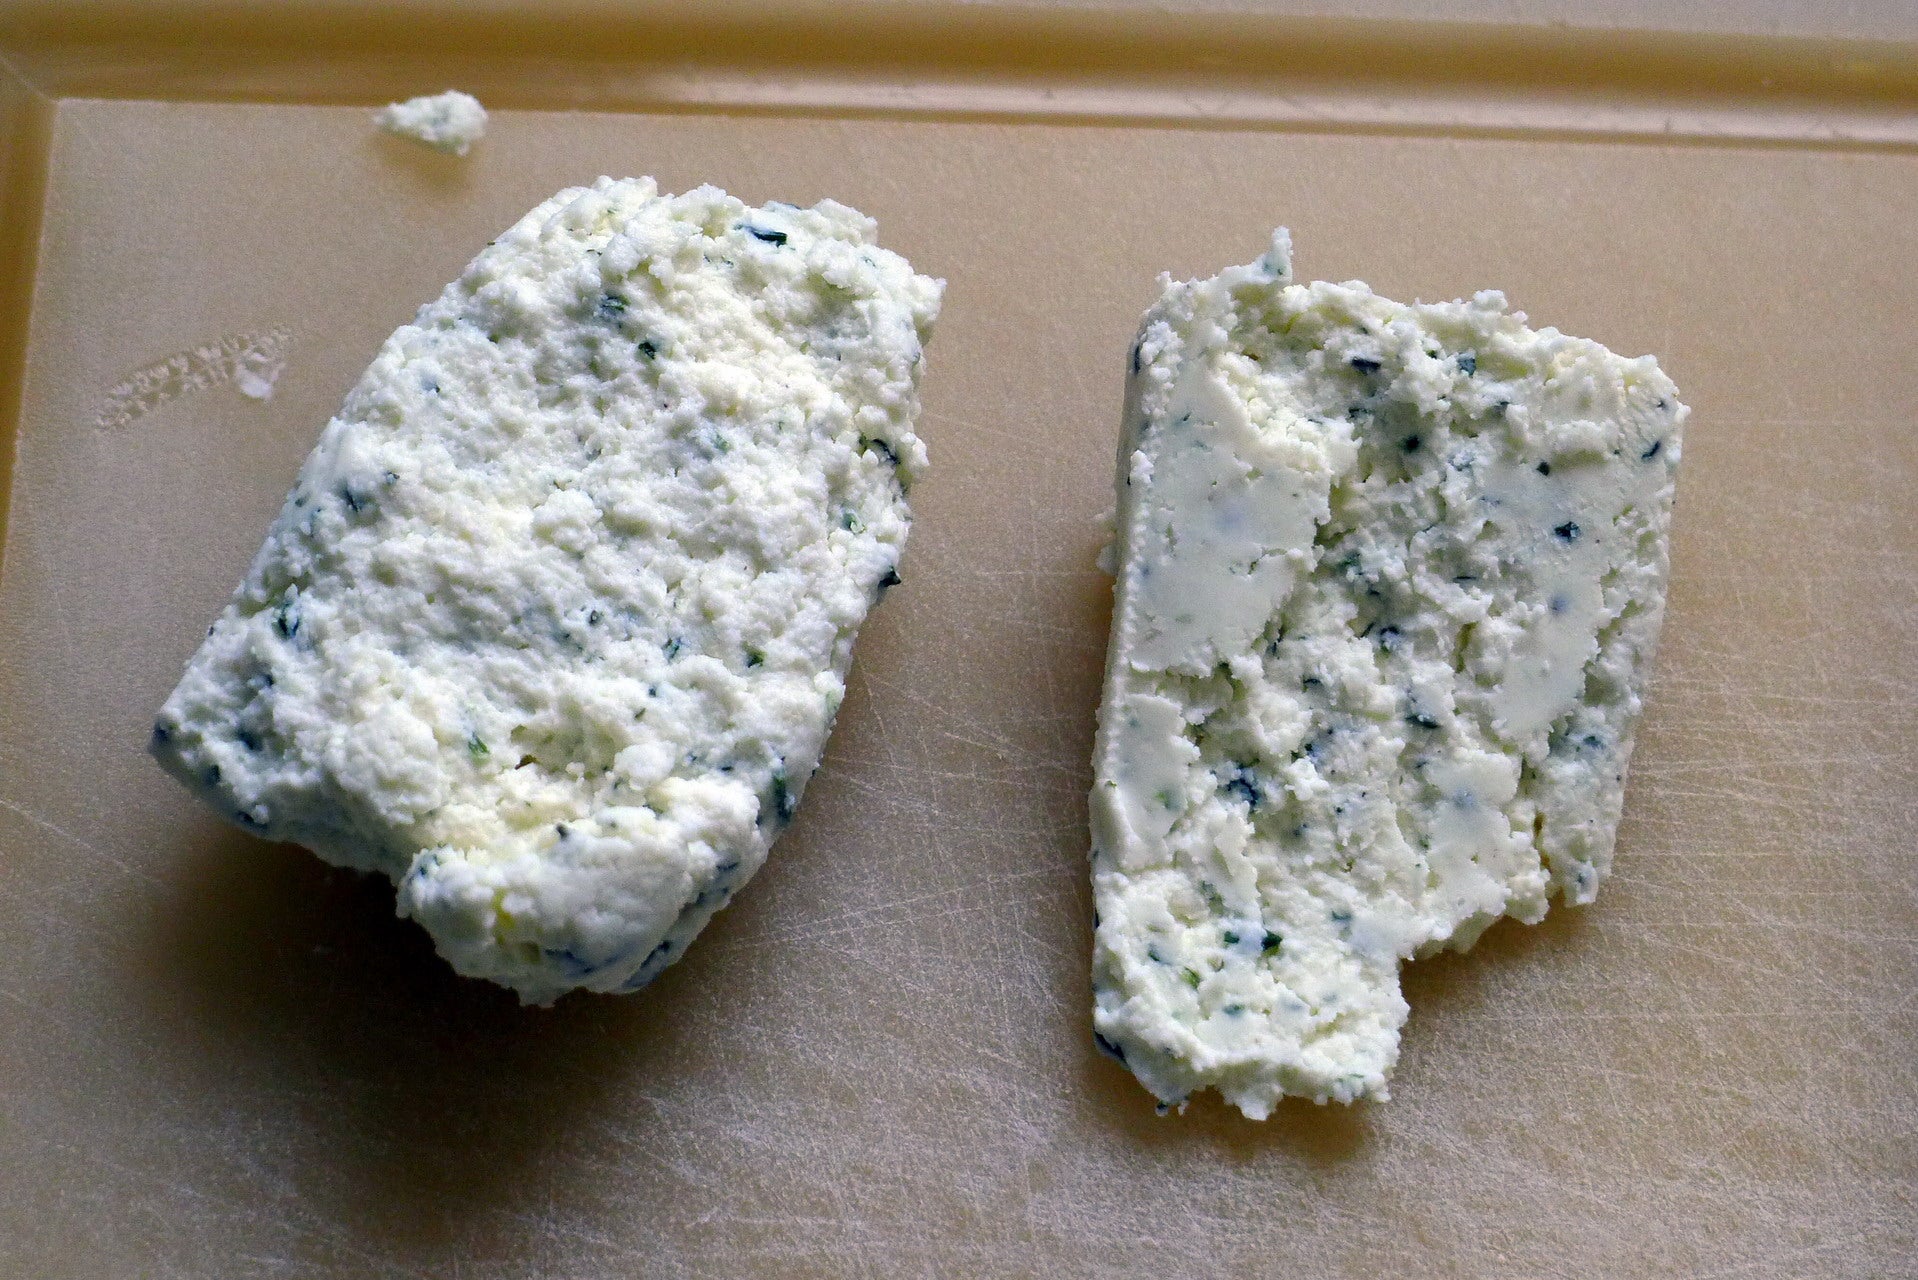 Two blocks of Boursin cheese. One previously frozen, one fresh. We couldn't tell the difference